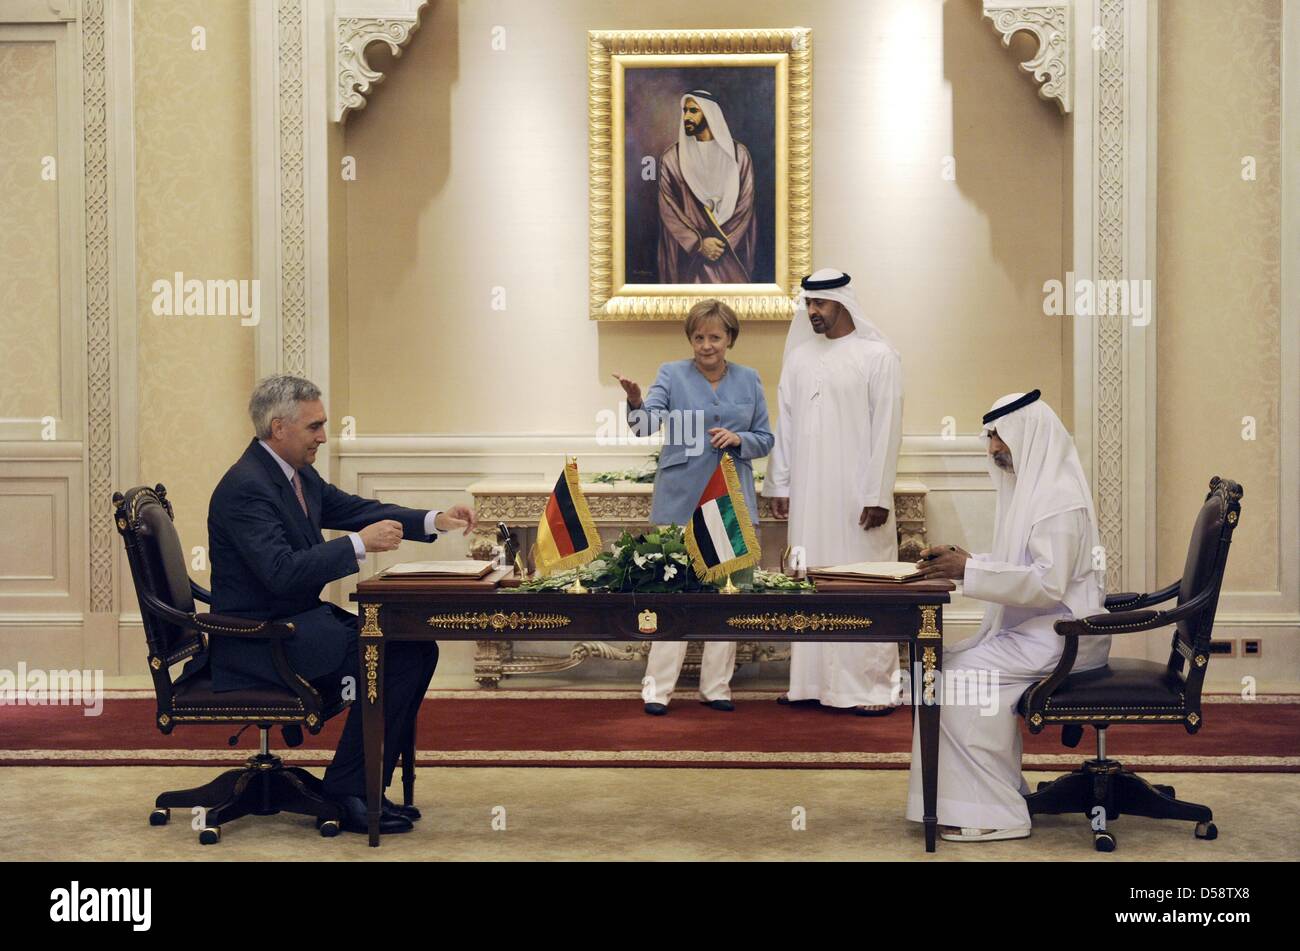 German Chancellor Angela Merkel attends a contract signature with UAE's Crown Prince and Vice President Sheik Mohammed bin Said al- Nahjan (back R), Sheik Nahjan bin Mubarak al-Nahjan (R) and Siemens AG CEO Peter Loescher (L) in Abu Dhabi, United Arab Emirates (UAE), 24 May 2010. Merkel will visit four of six Gulf Cooperation Council countries until 27 May 2010 to improve economic  Stock Photo